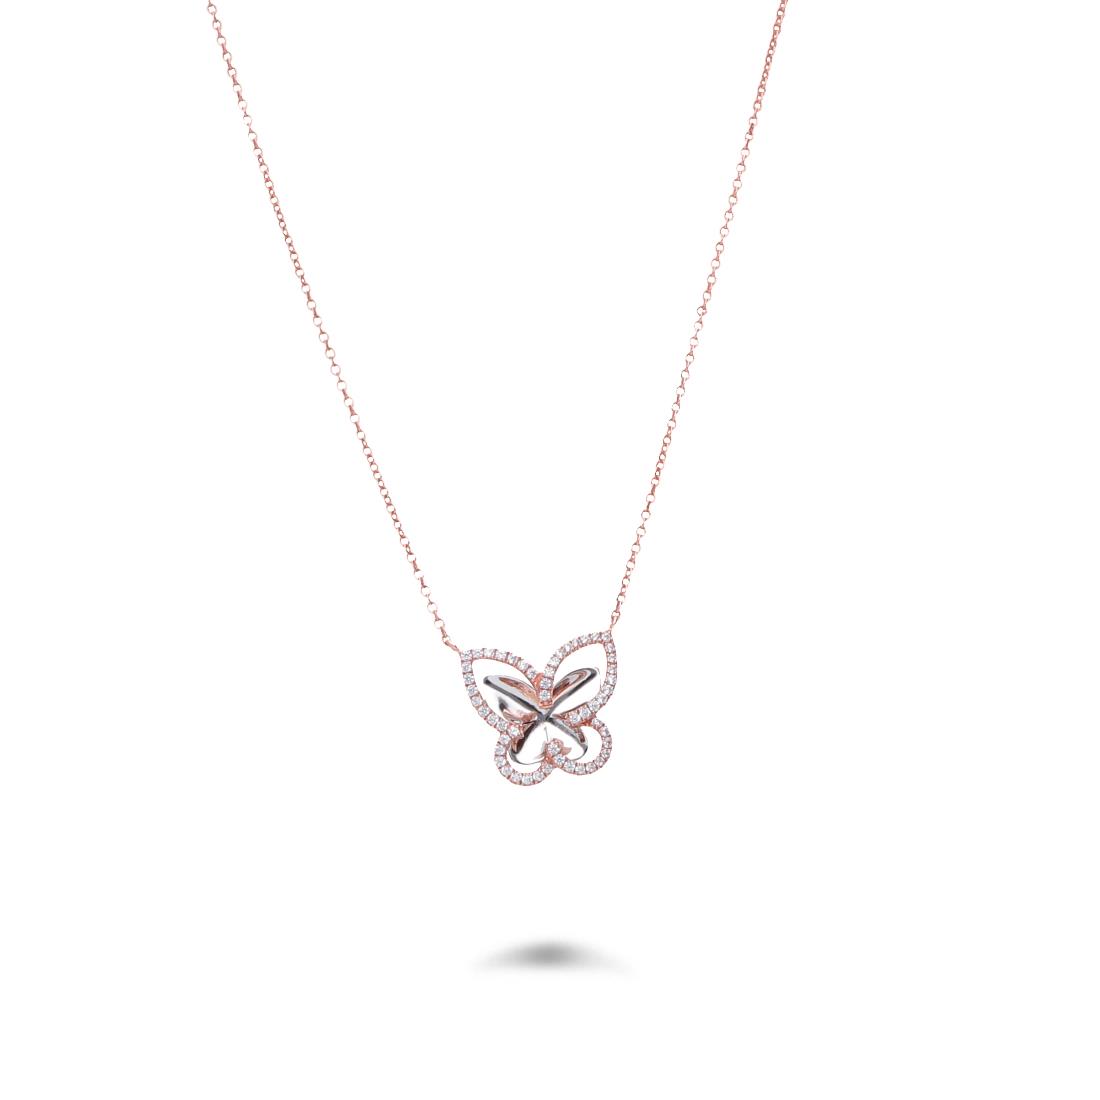 Silver necklace with pendant necklace with cubic zirconia - ORO&CO 925